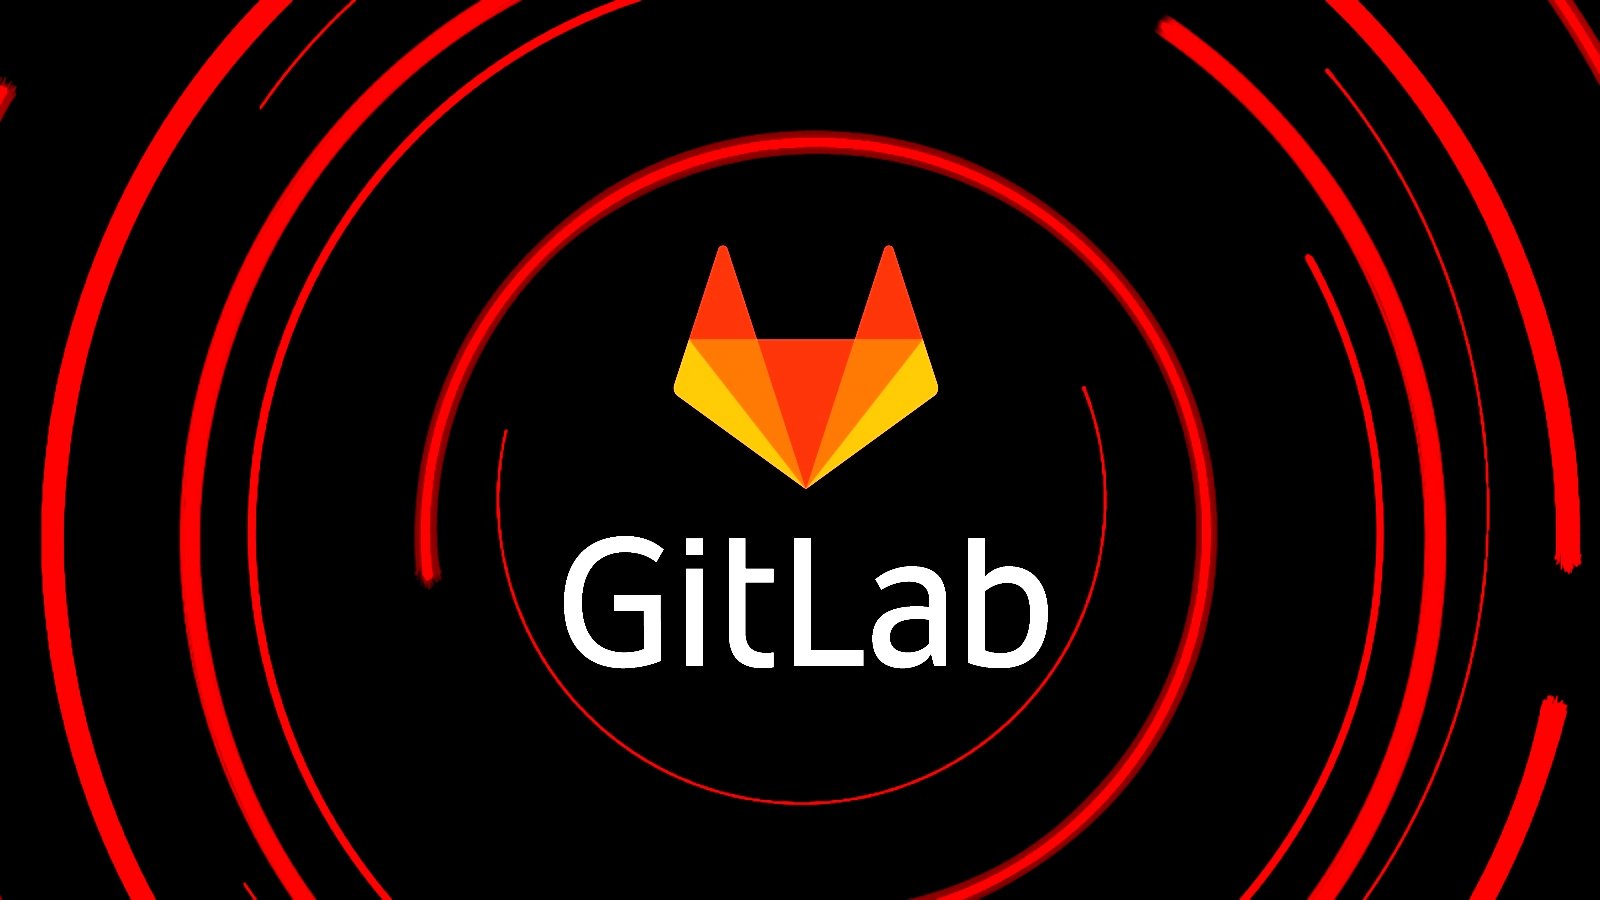 GitLab affected by GitHub-style CDN flaw allowing malware hosting